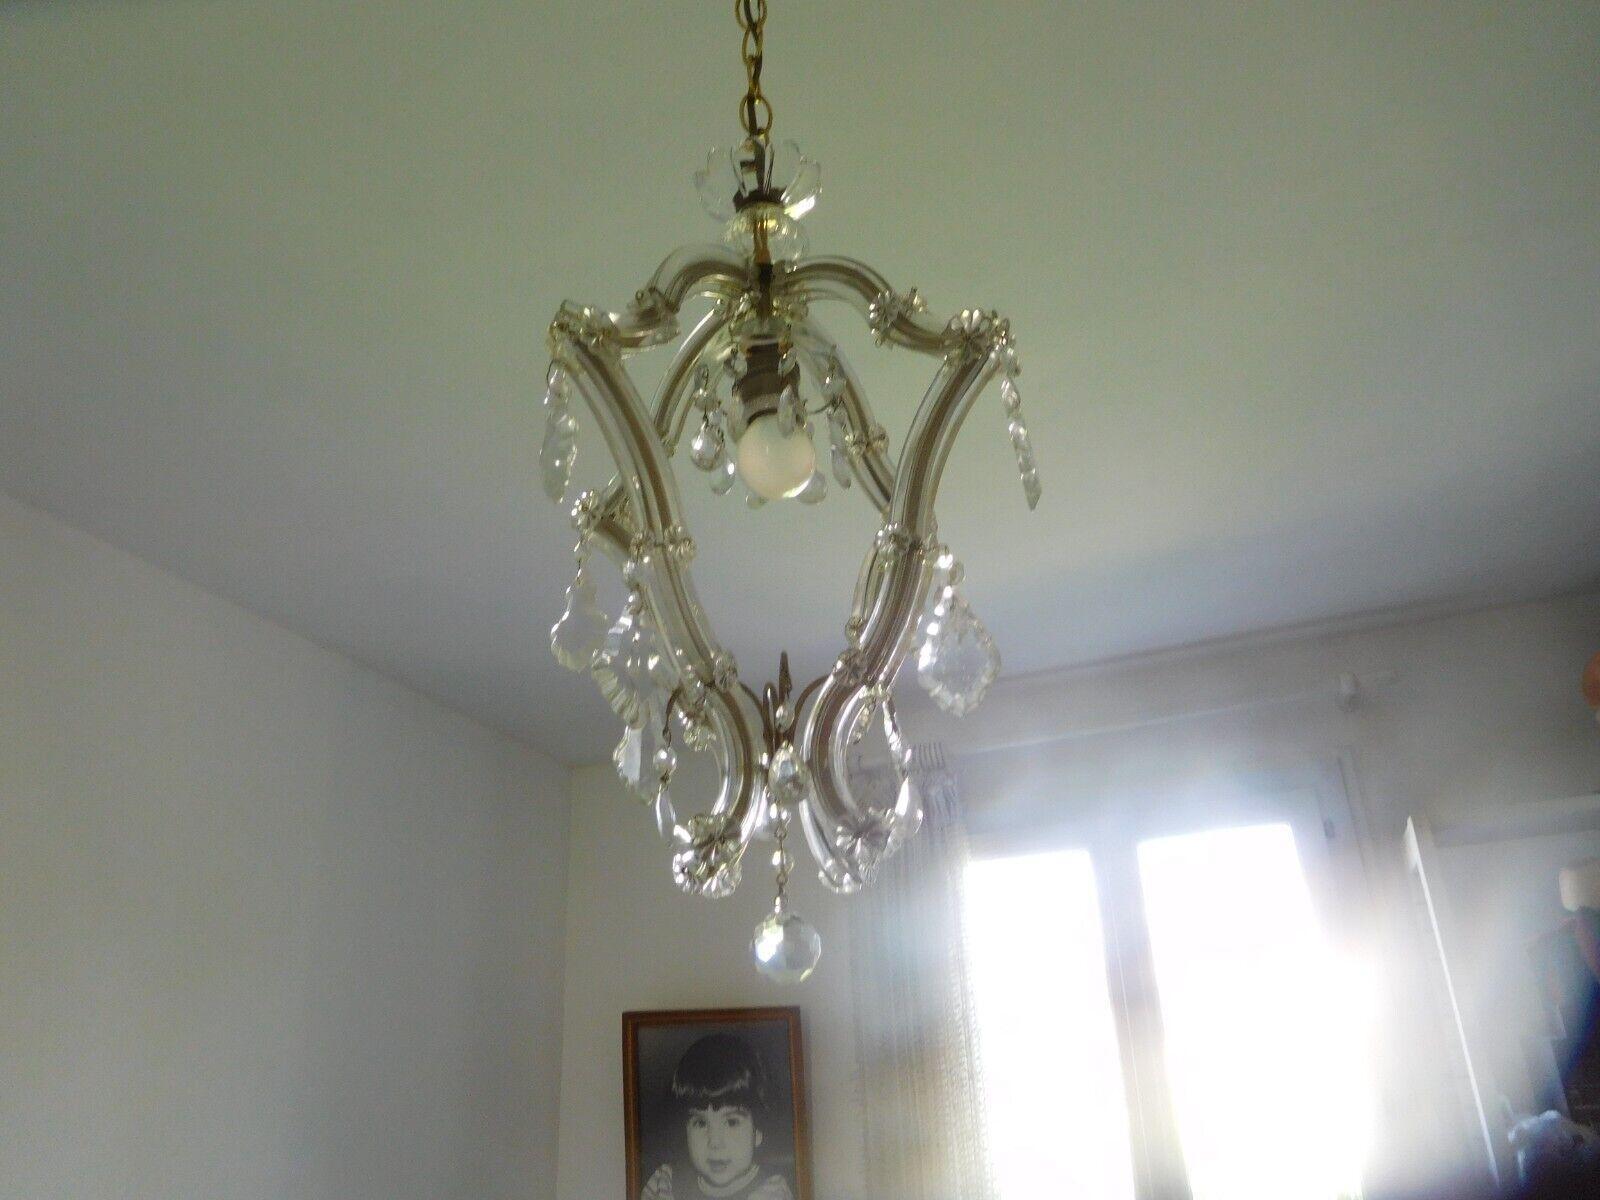 1960's Hollywood Regency style Murano Art Glass Ceiling Lantern From Italy In Good Condition For Sale In Opa Locka, FL